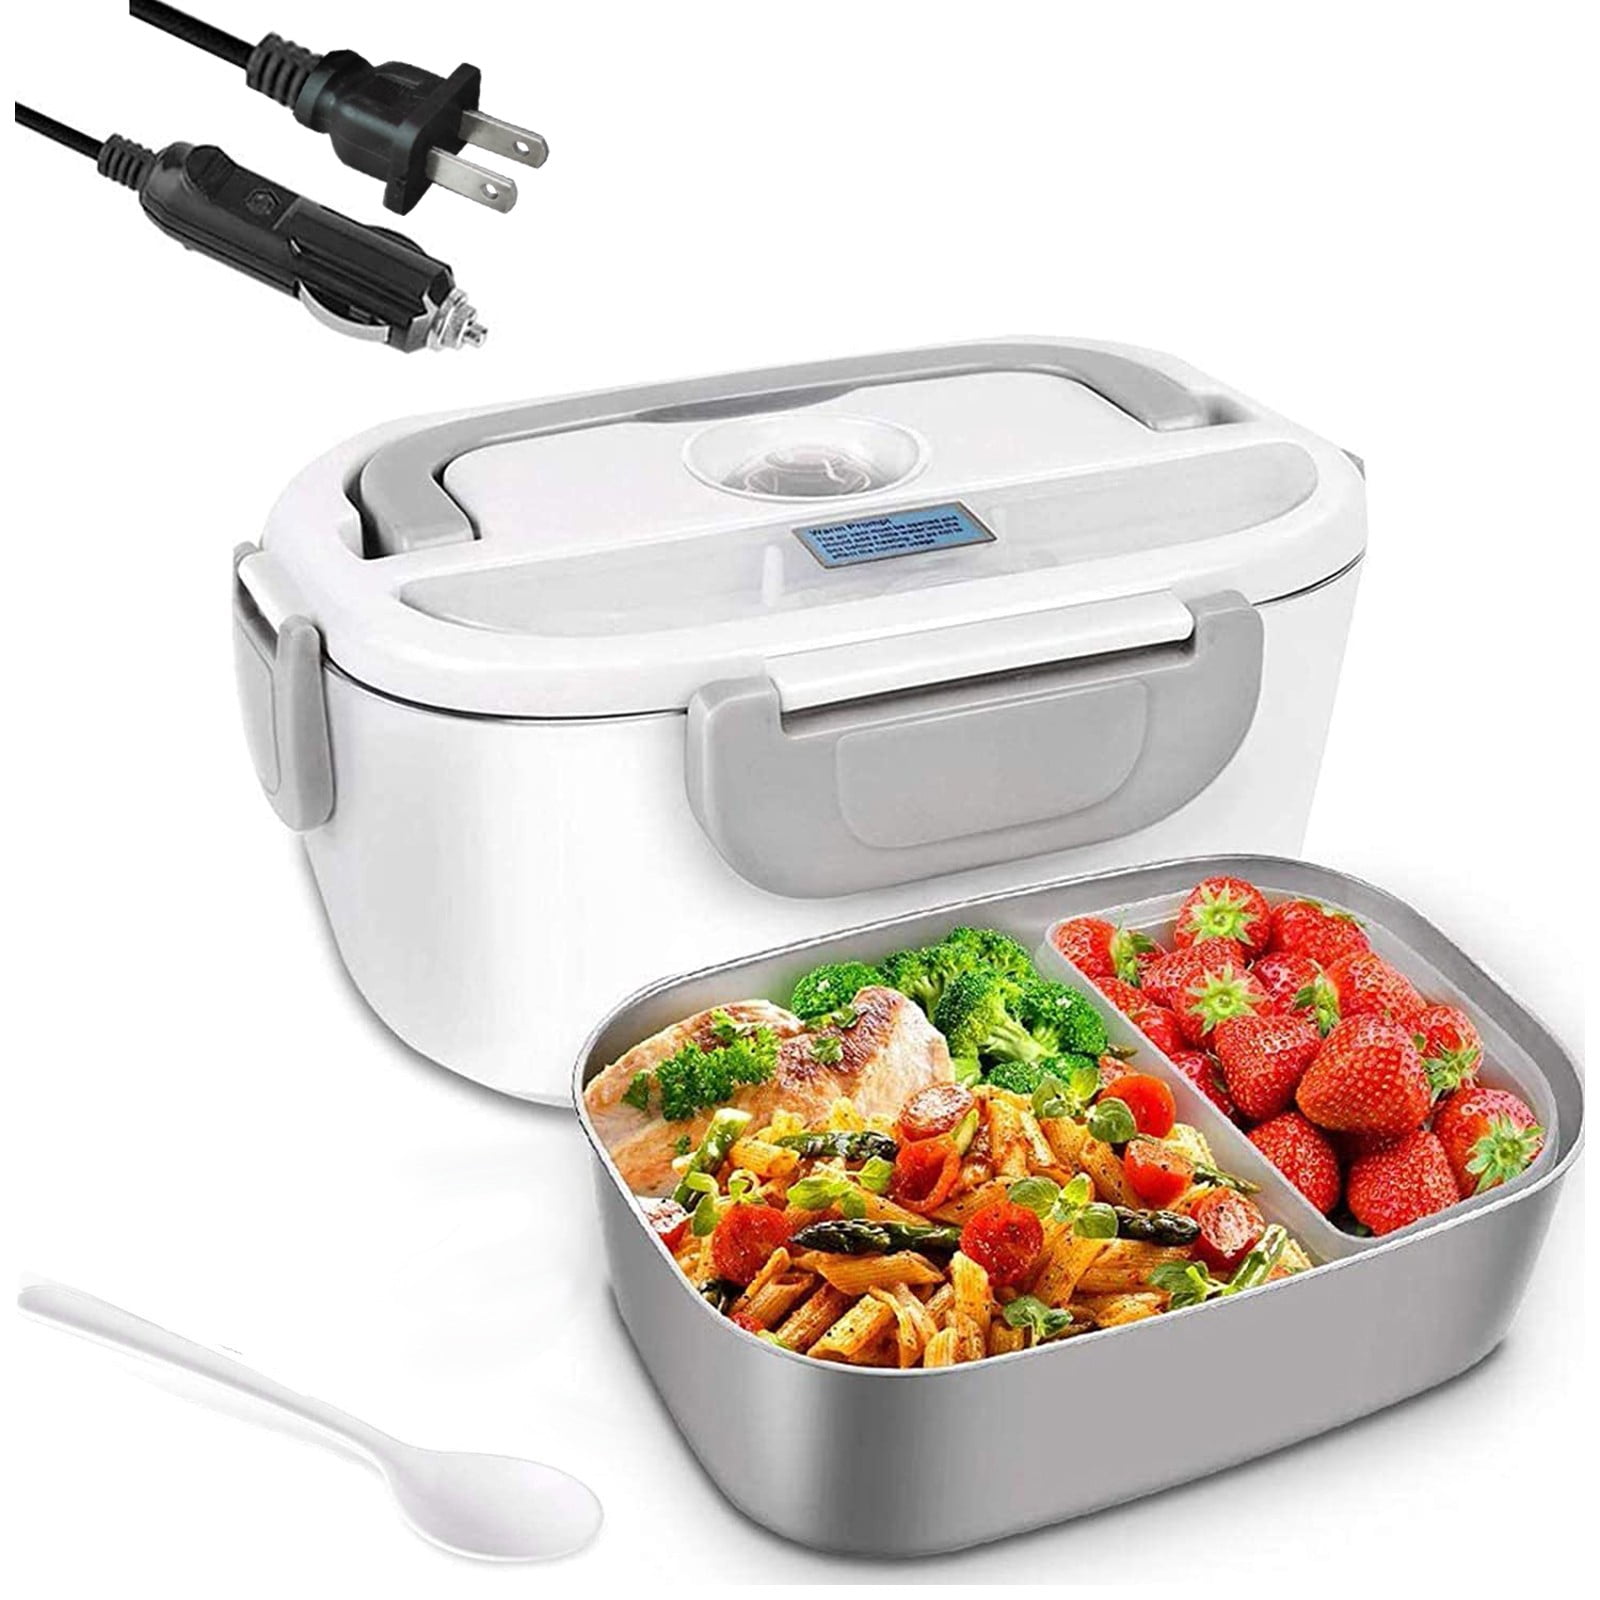 Kabbas Electric Lunch Box Food Heater with 2 Compartments 70W Leakproof  Portable Food Warmer Lunch B…See more Kabbas Electric Lunch Box Food Heater